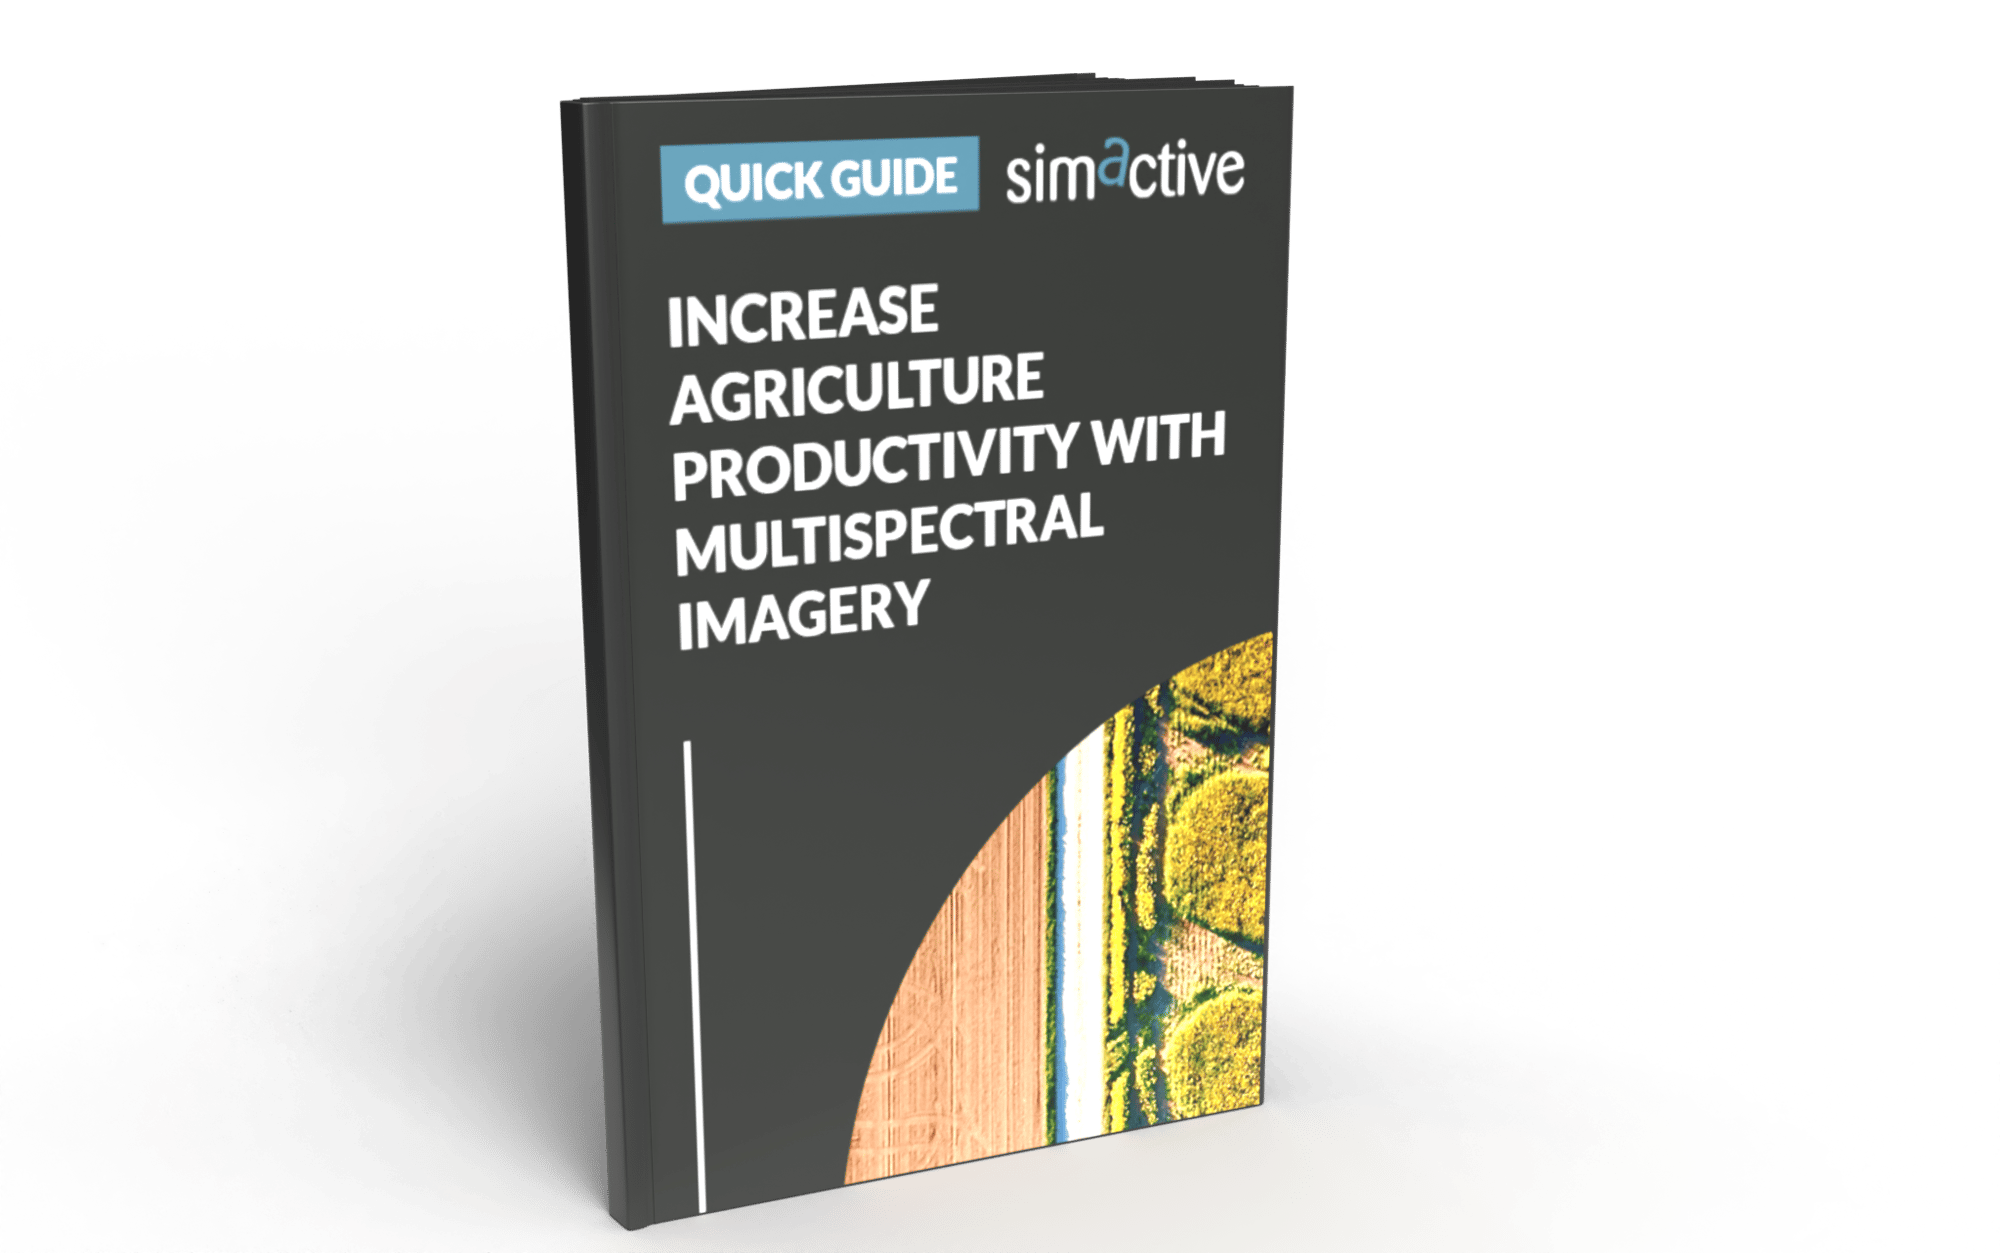 Increase Agriculture Productivity with Multispectral Imagery